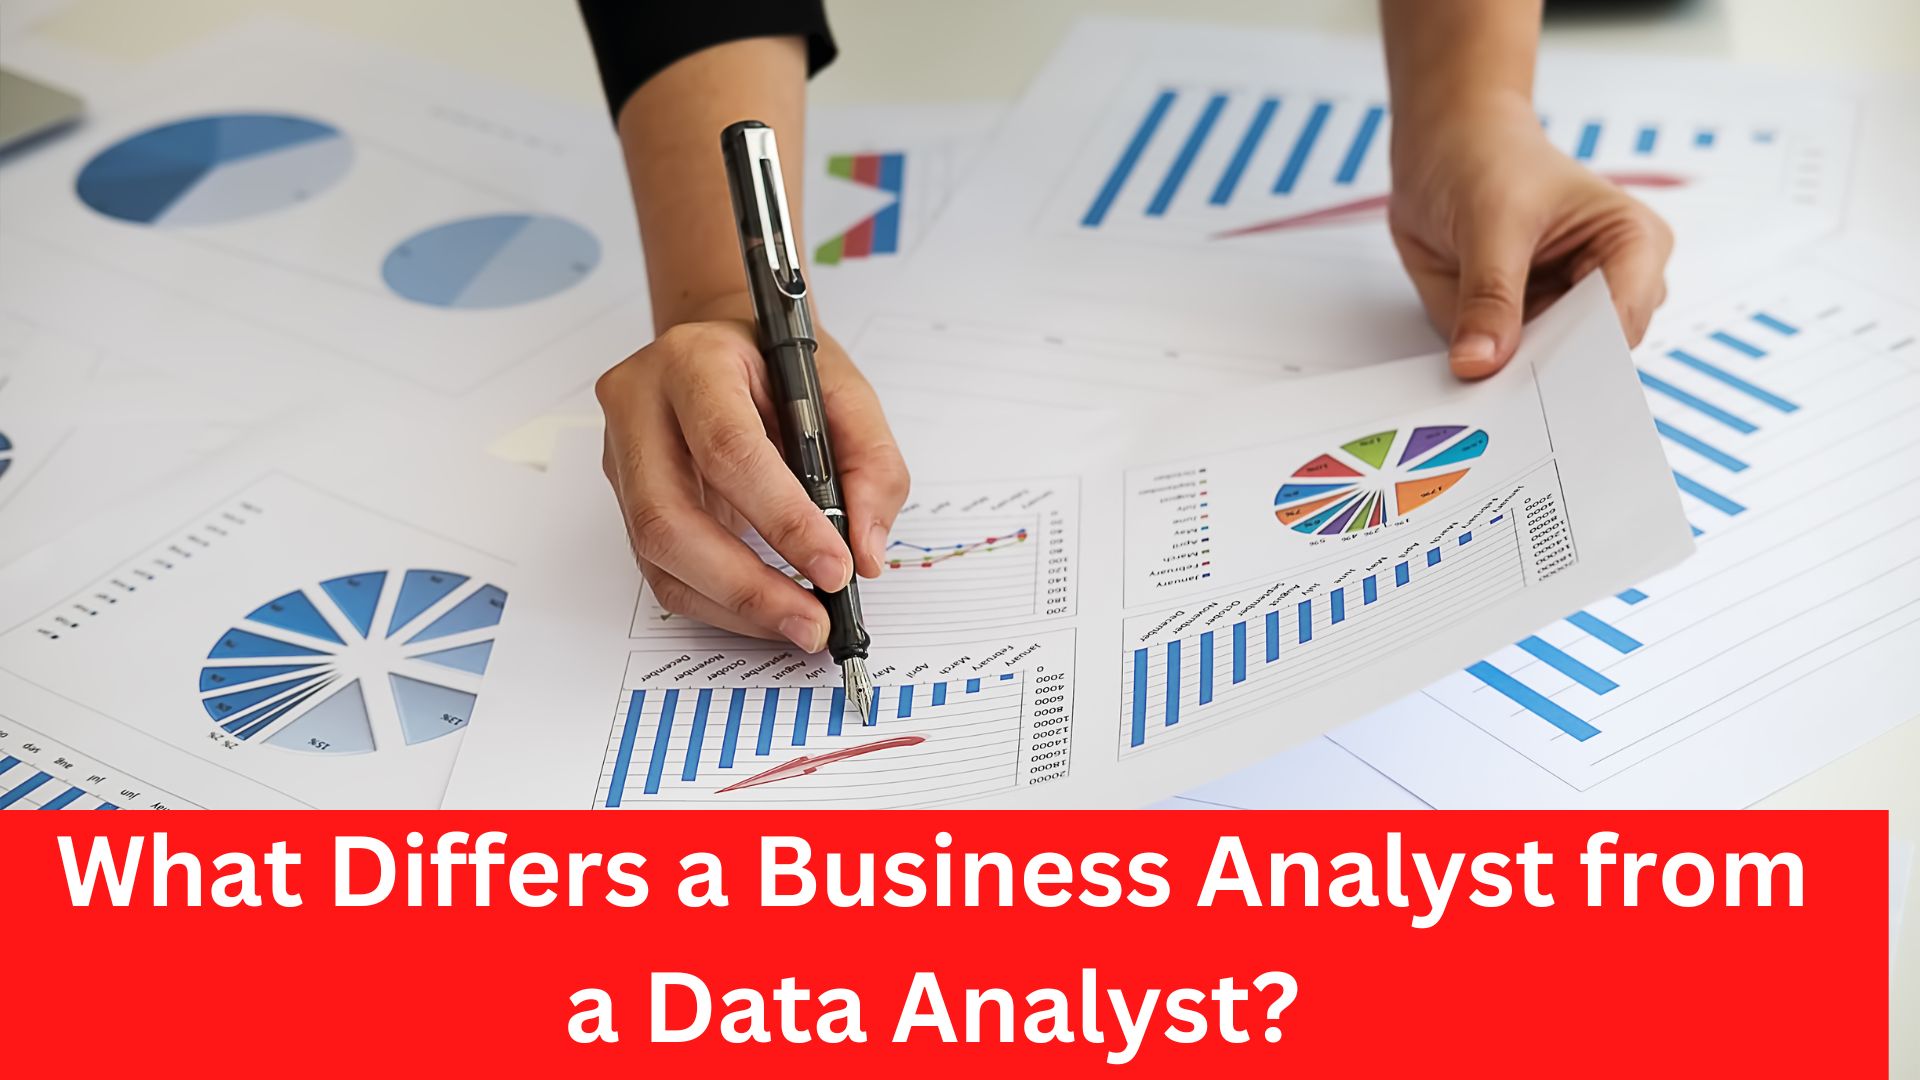 What Differs a Business Analyst from a Data Analyst